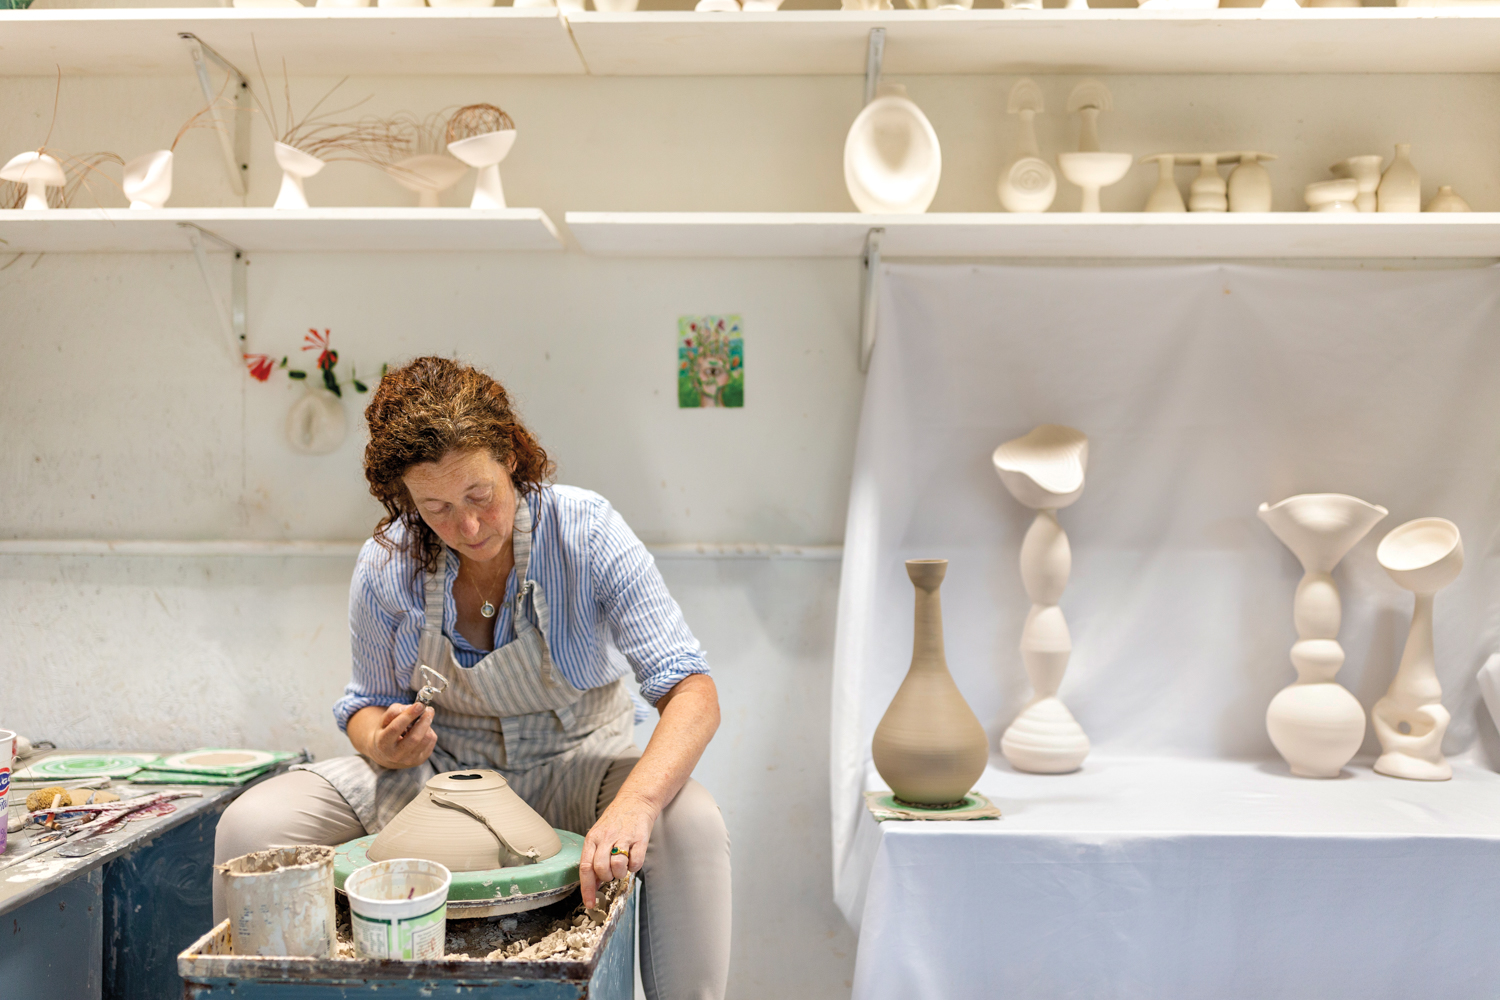 The Latest Fad in the Hamptons: Pottery Wheels - The New York Times